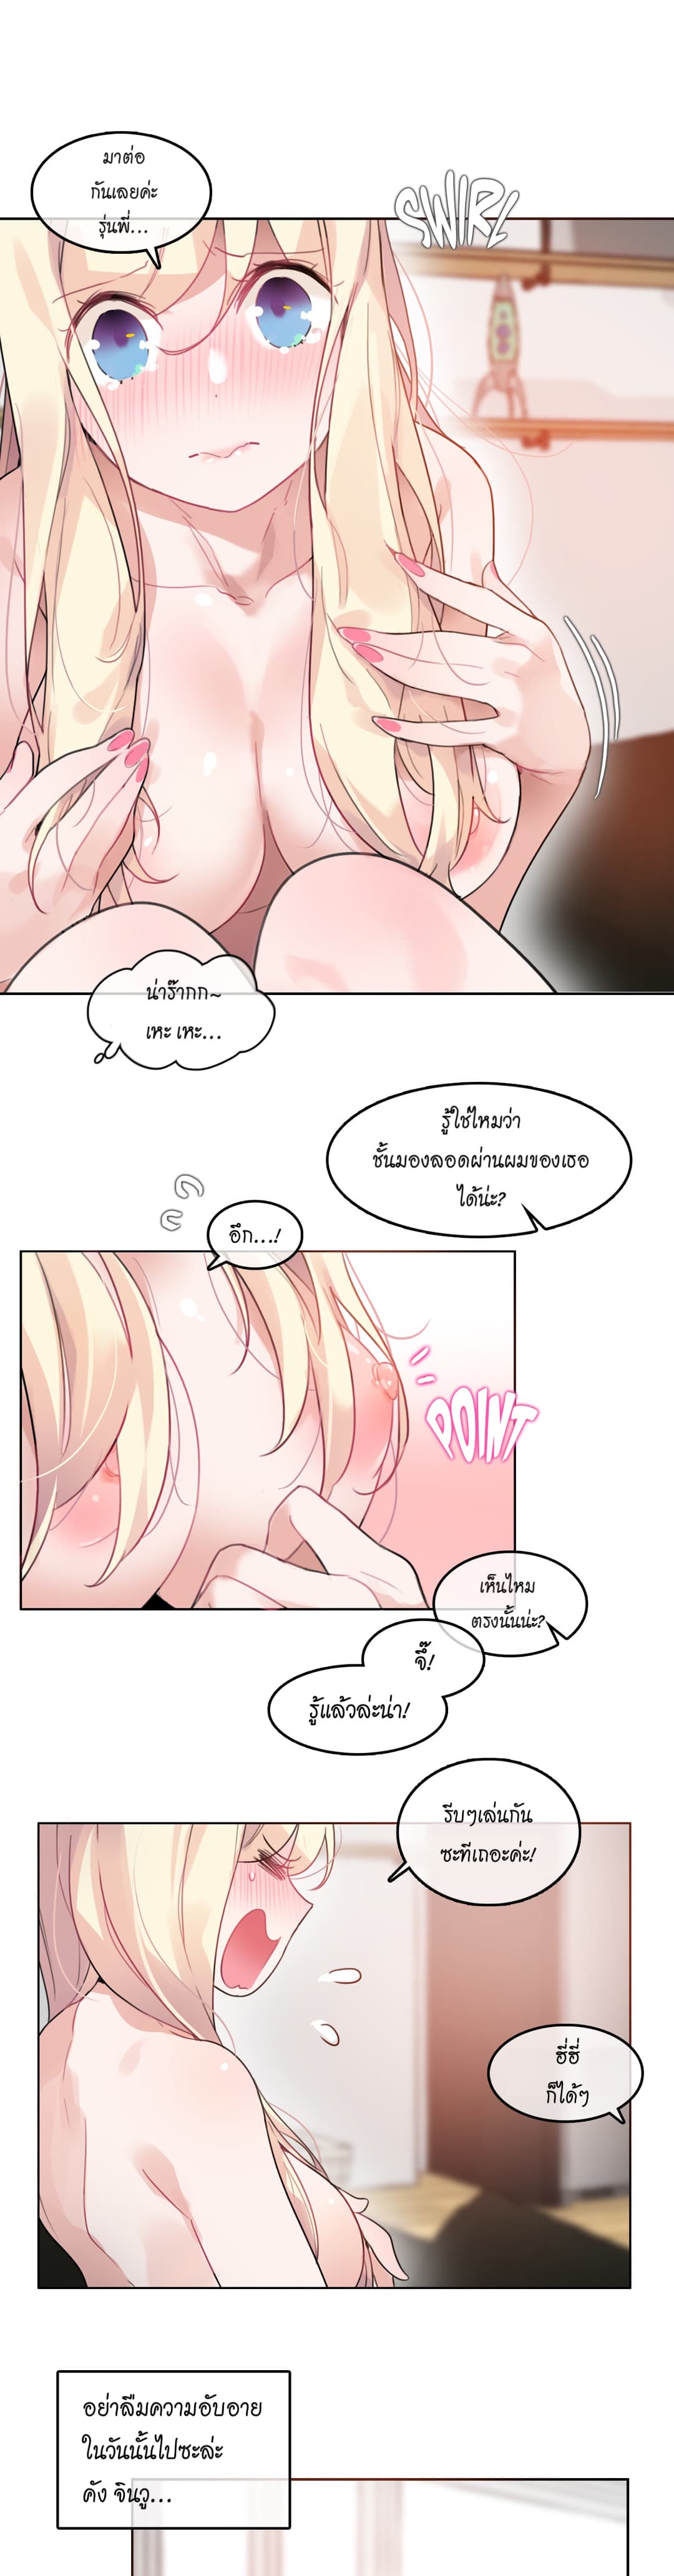 A Pervert’s Daily Life 34 (13)